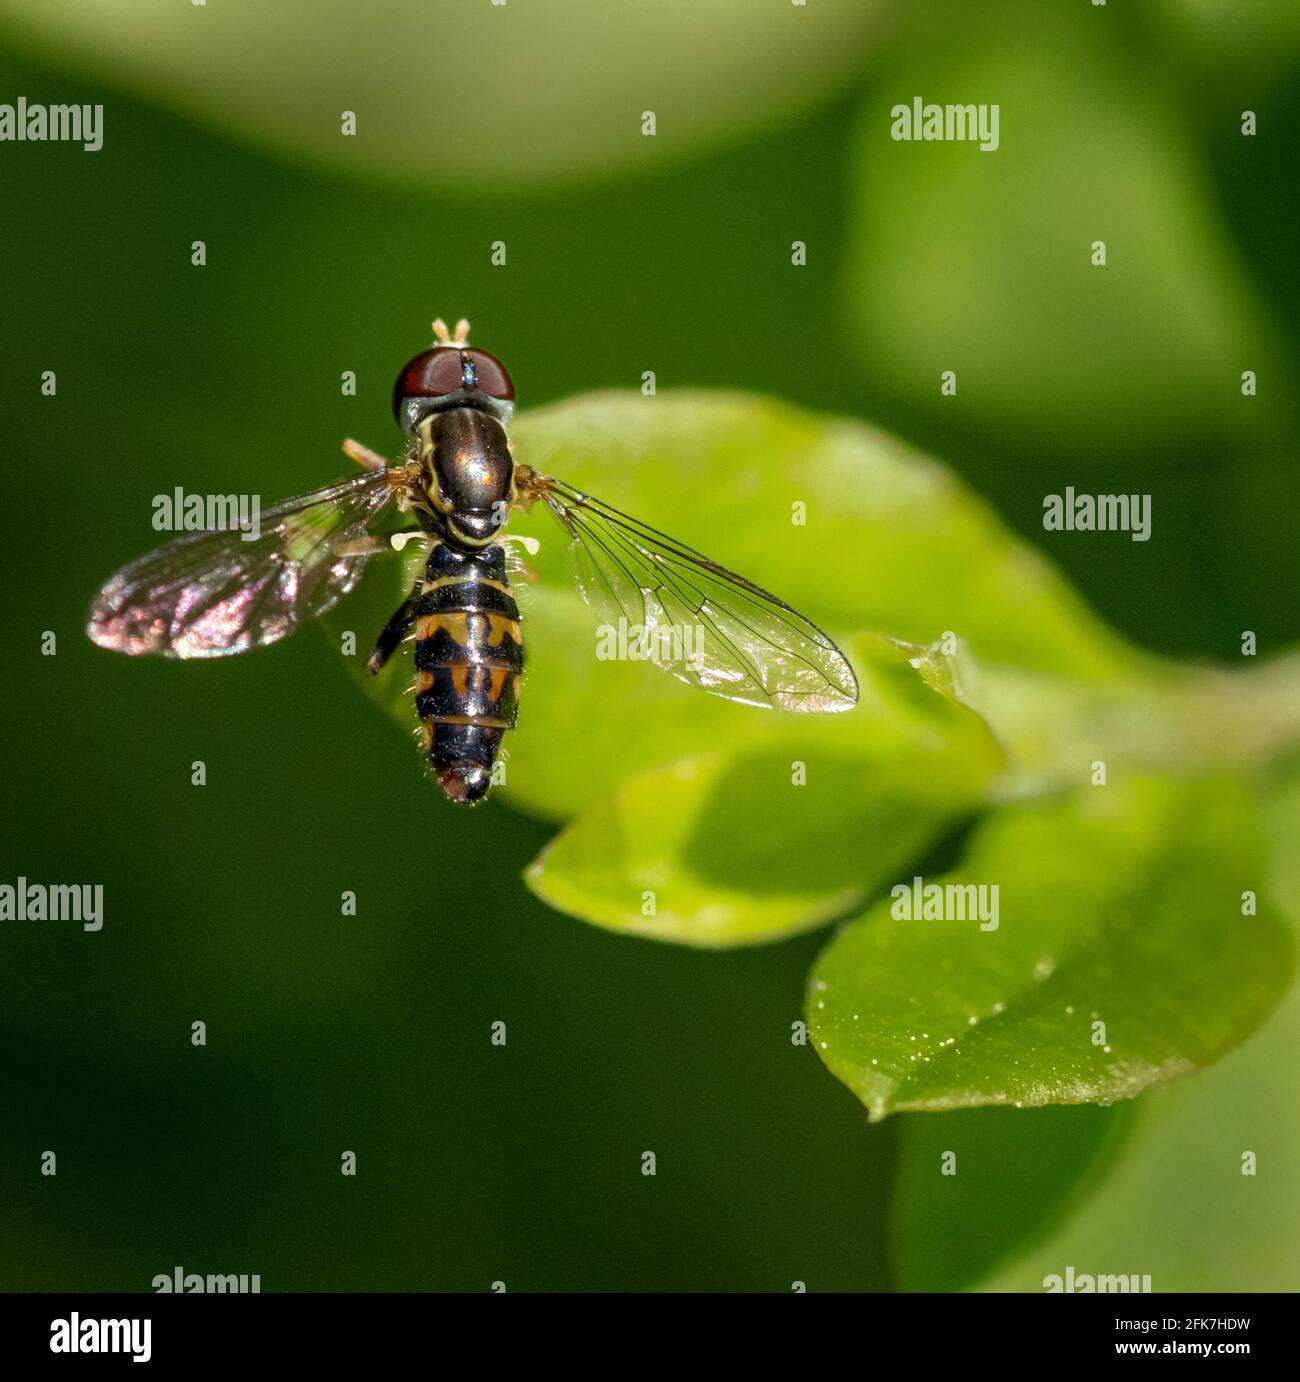 Calligrapher Fly (Toxomerus marginatus) - Hall County, Georgia. A Calligrapher fly rests on the leaf of a shrub. Stock Photo